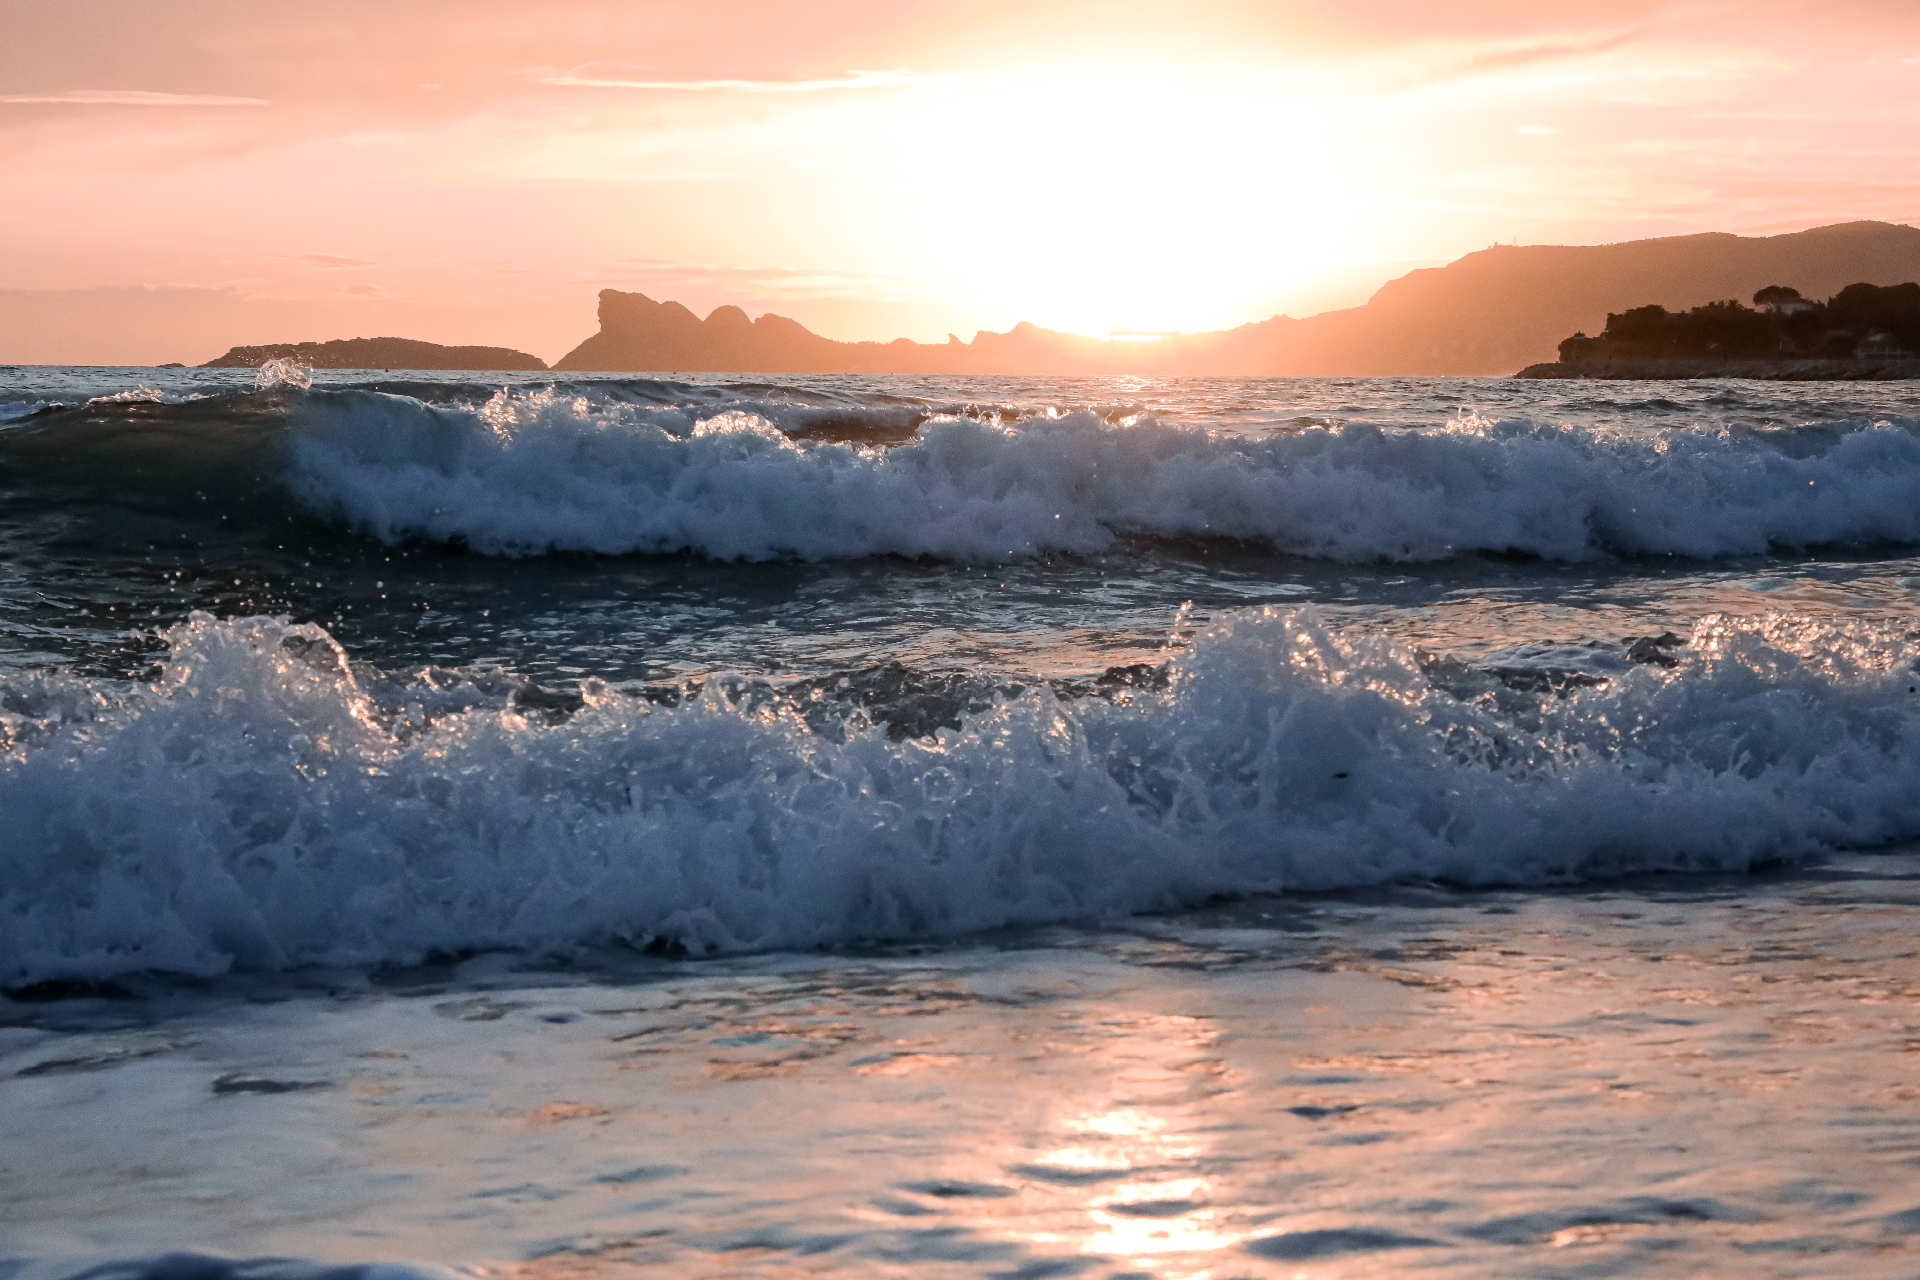 Photo of waves crashing on the beach during sunset. Have your anxiety symptoms taken over your life? Learn how anxiety therapy in San Francisco, CA can help you learn the coping skills to manage your anxiety symptoms.